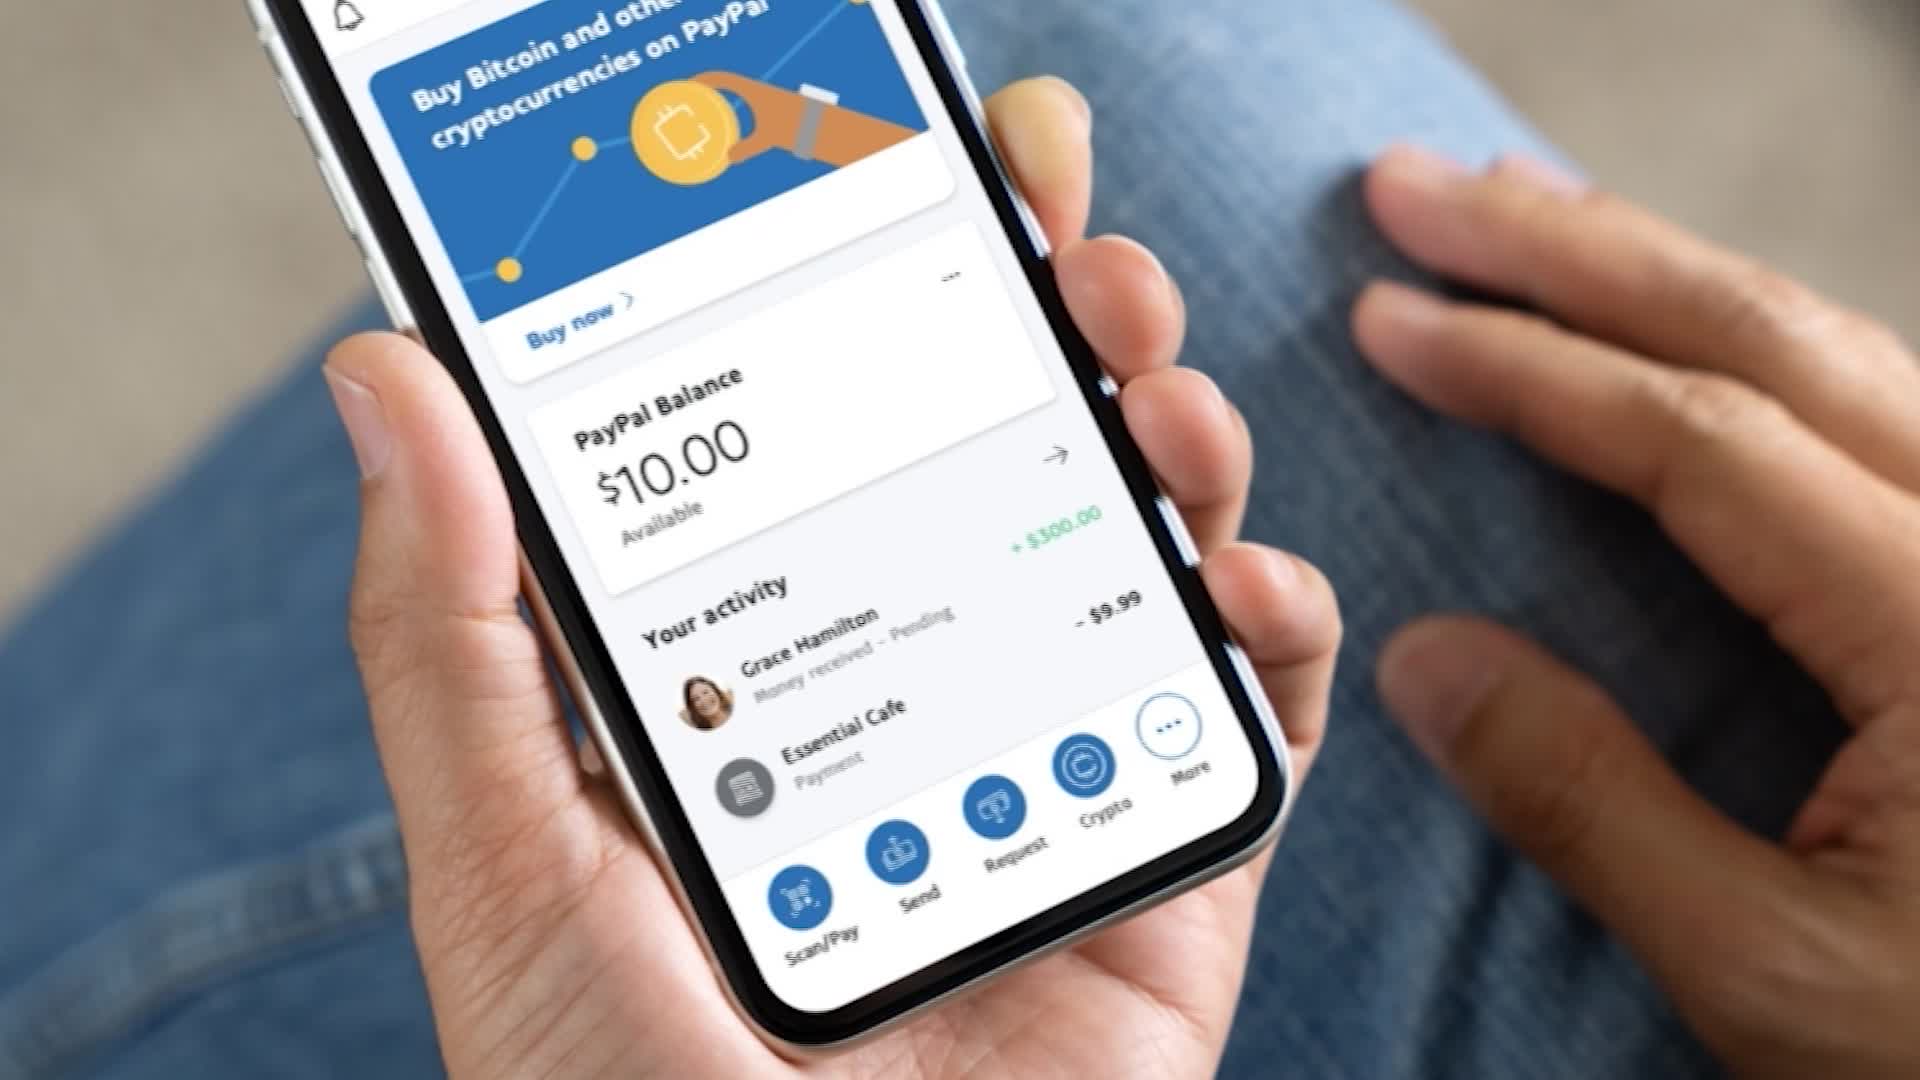 PayPal adds its PYUSD stablecoin to Venmo in push to expand crypto reach | Fortune Crypto